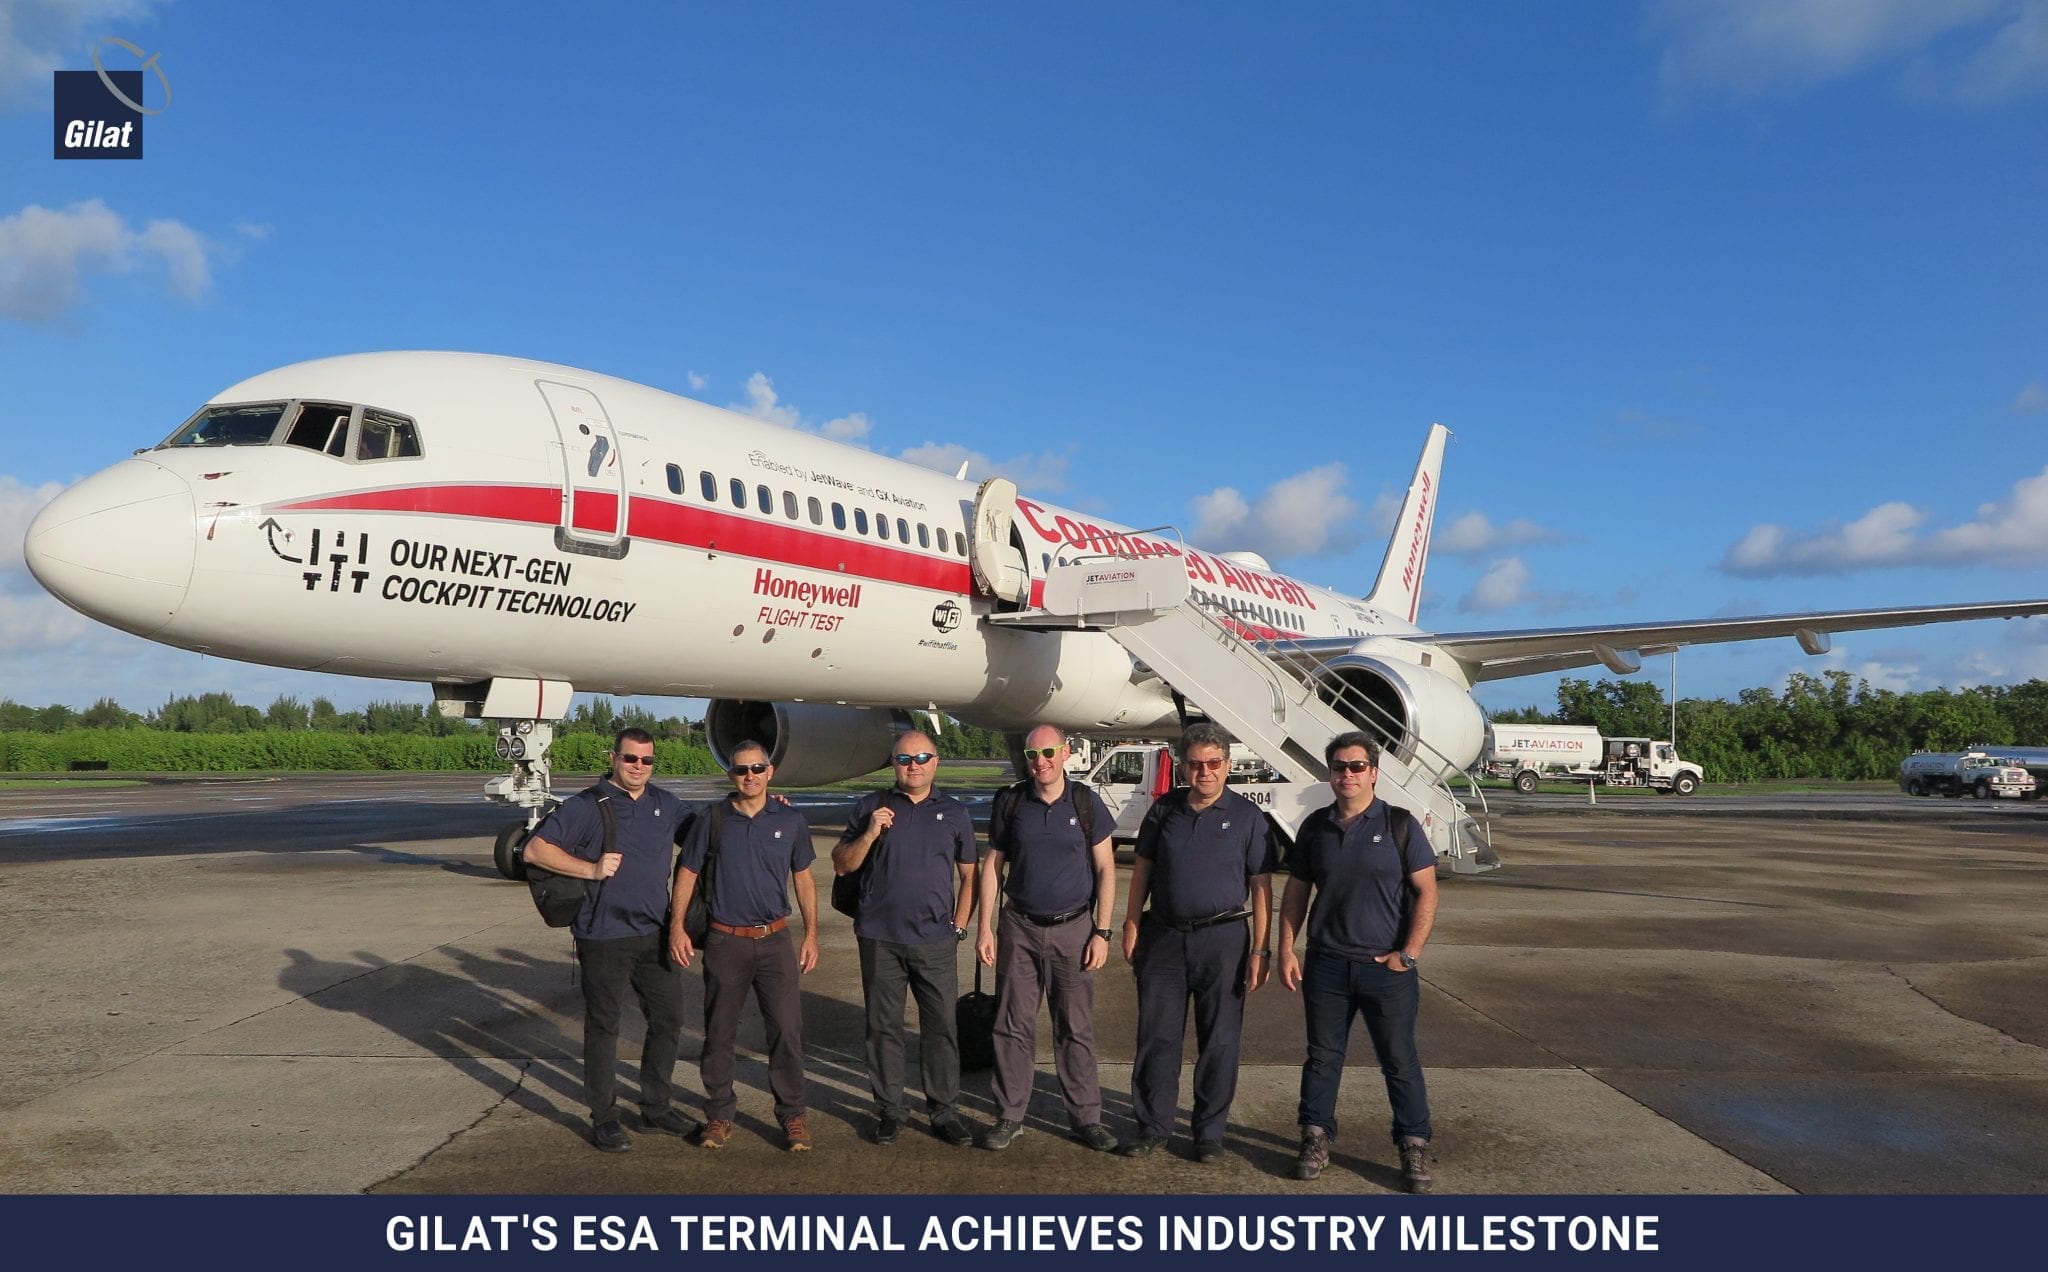 Gilat’s ESA Terminal Demonstrates First-ever In-Flight Operation on Commercial Aircraft